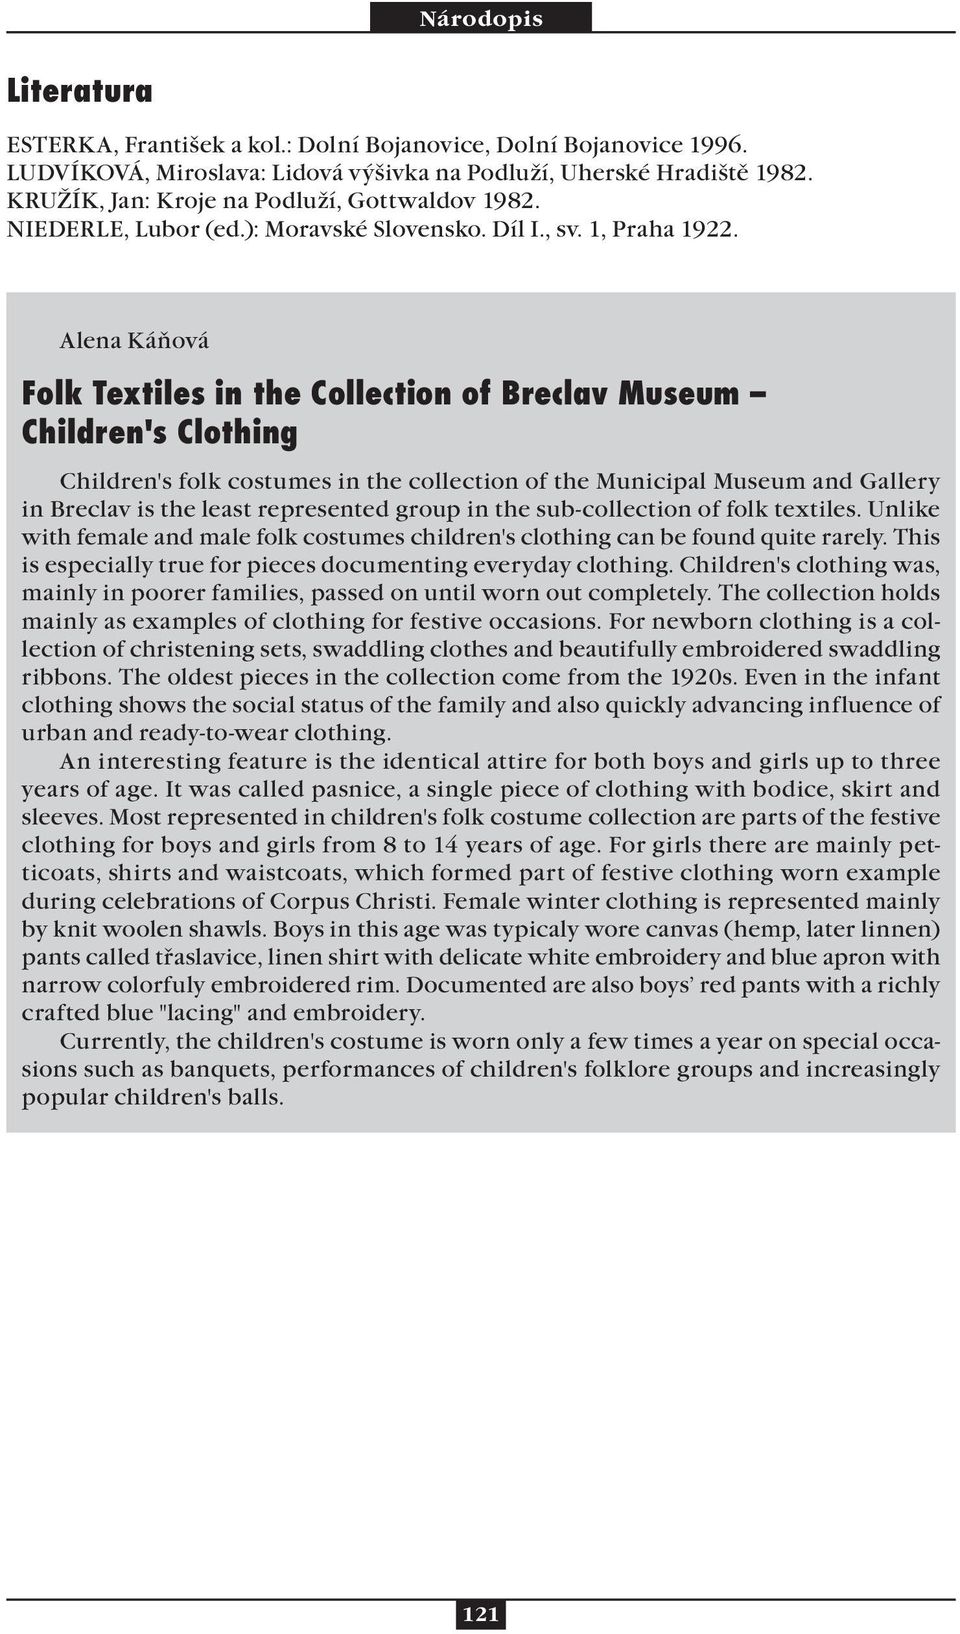 Alena Káňová Folk Textiles in the Collection of Breclav Museum Children's Clothing Children's folk costumes in the collection of the Municipal Museum and Gallery in Breclav is the least represented